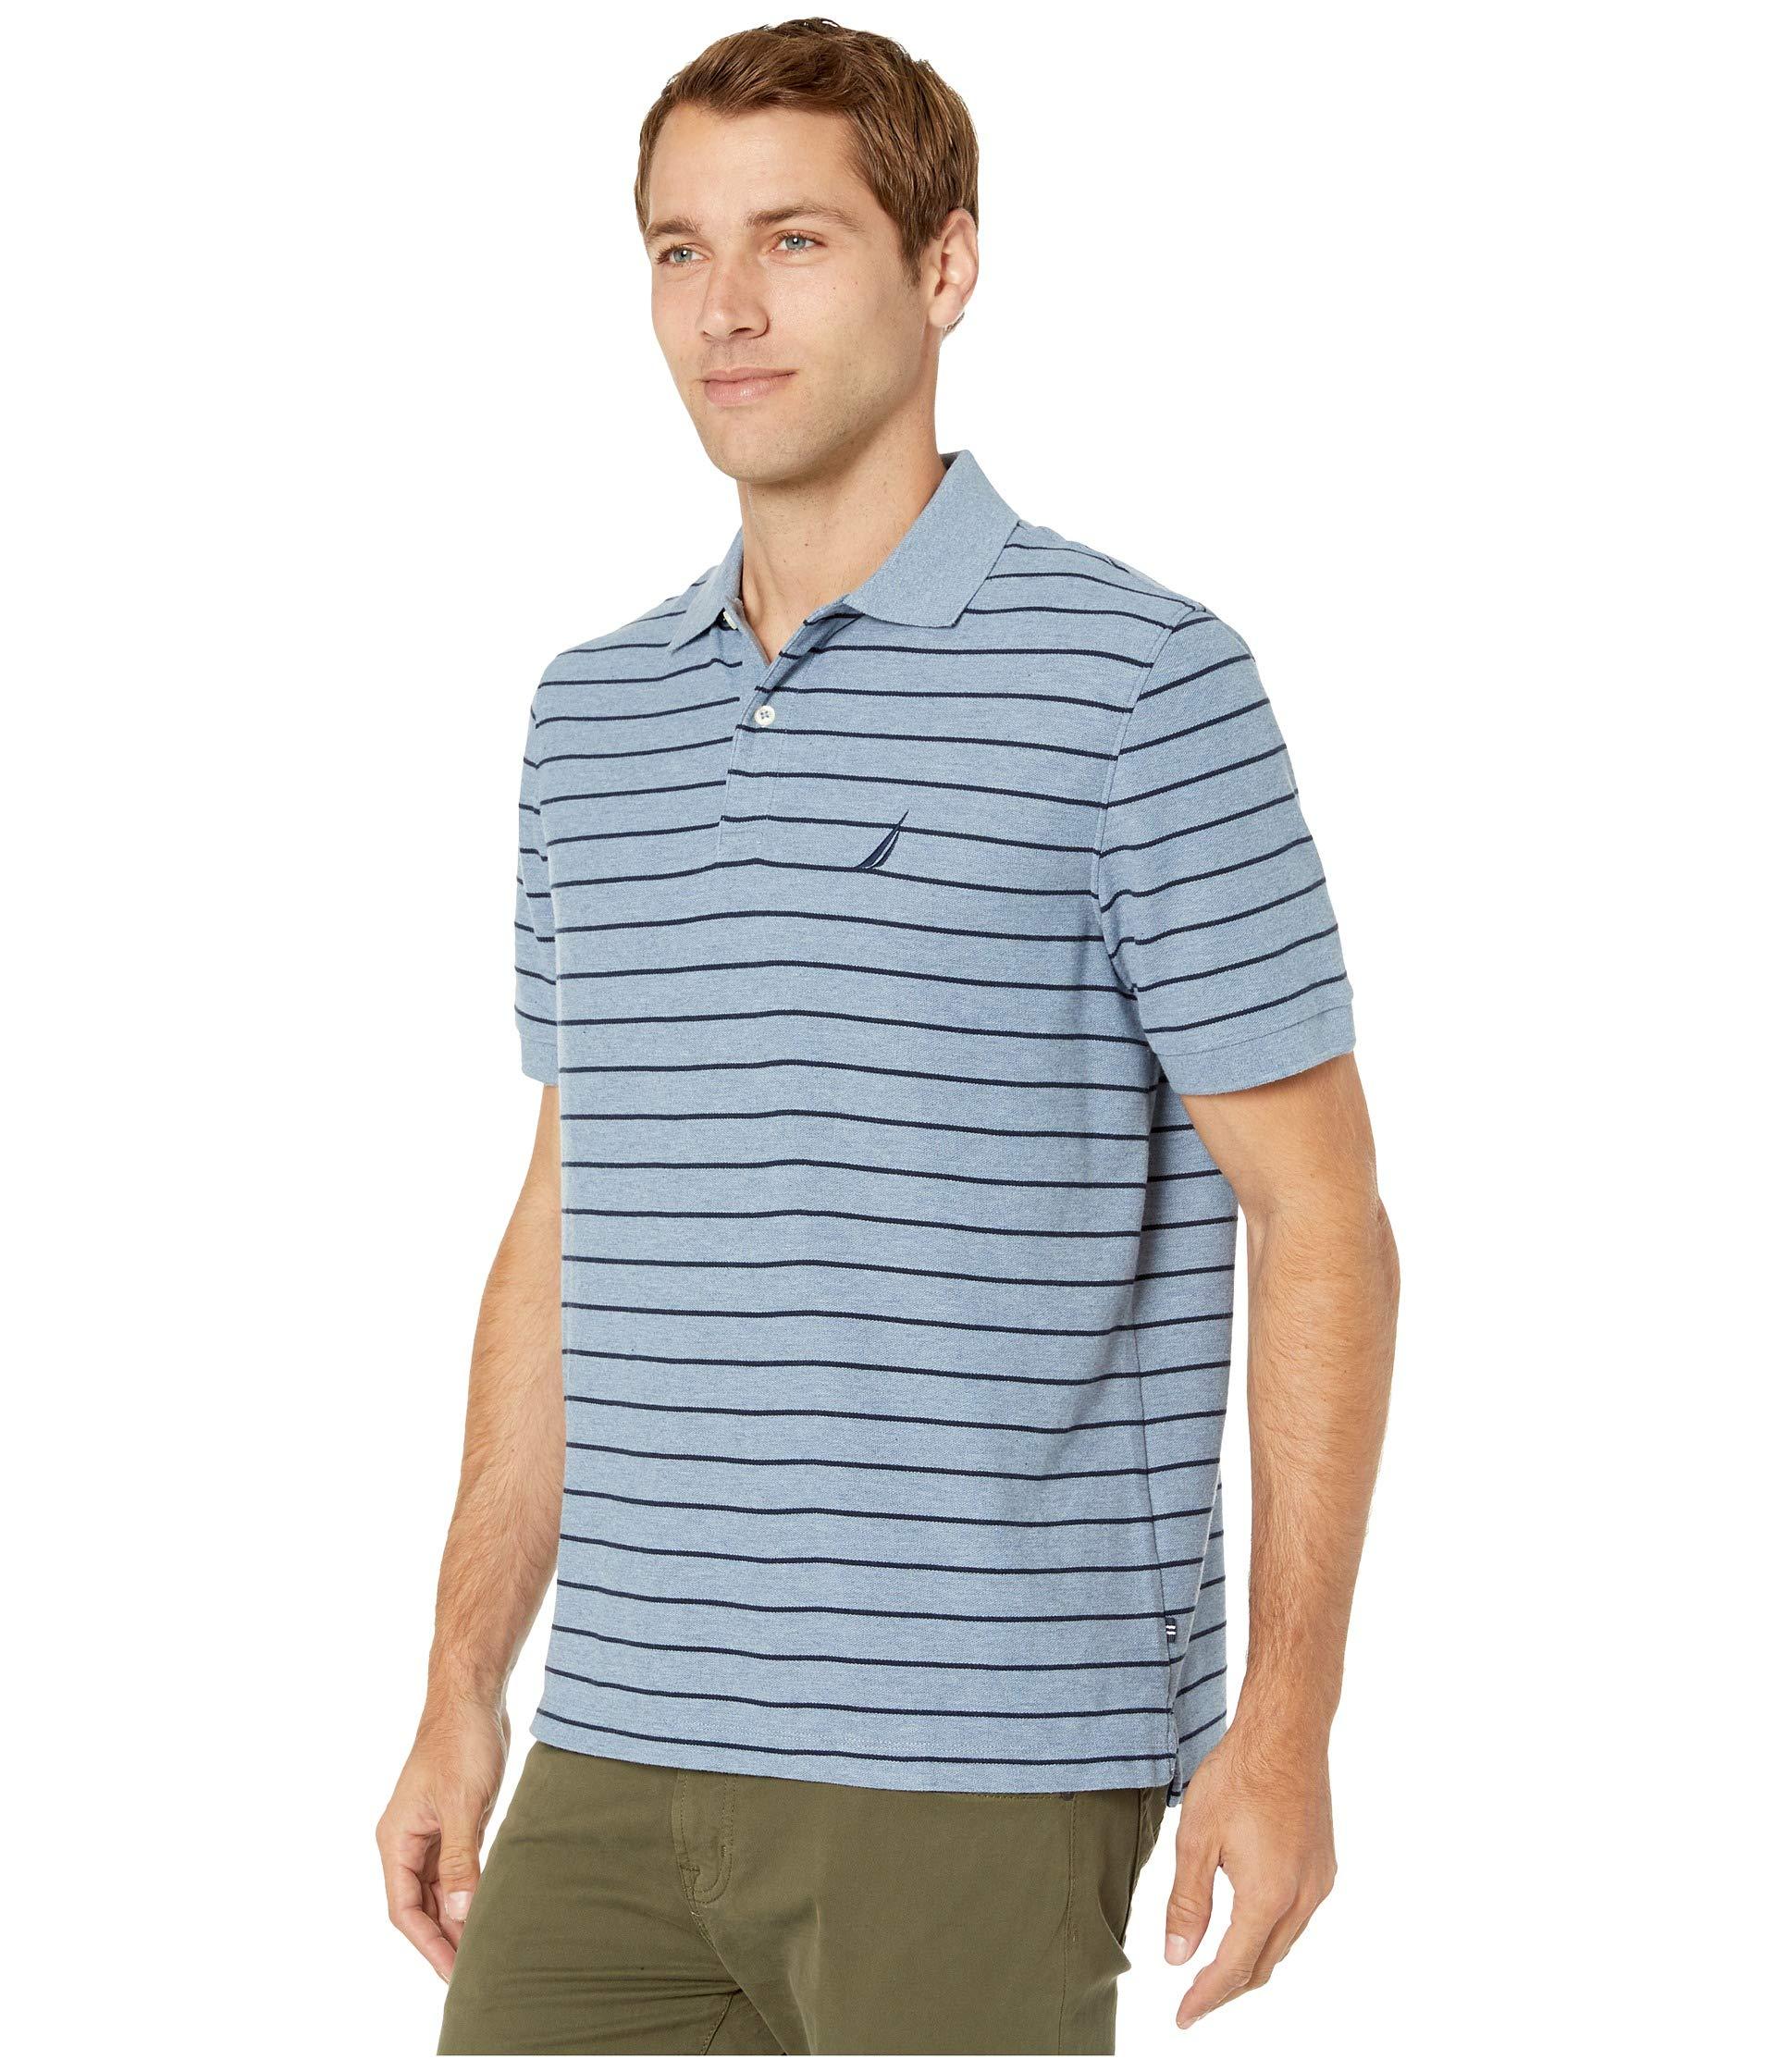 Nautica Cotton Striped Deck Polo Shirt in Blue for Men - Lyst